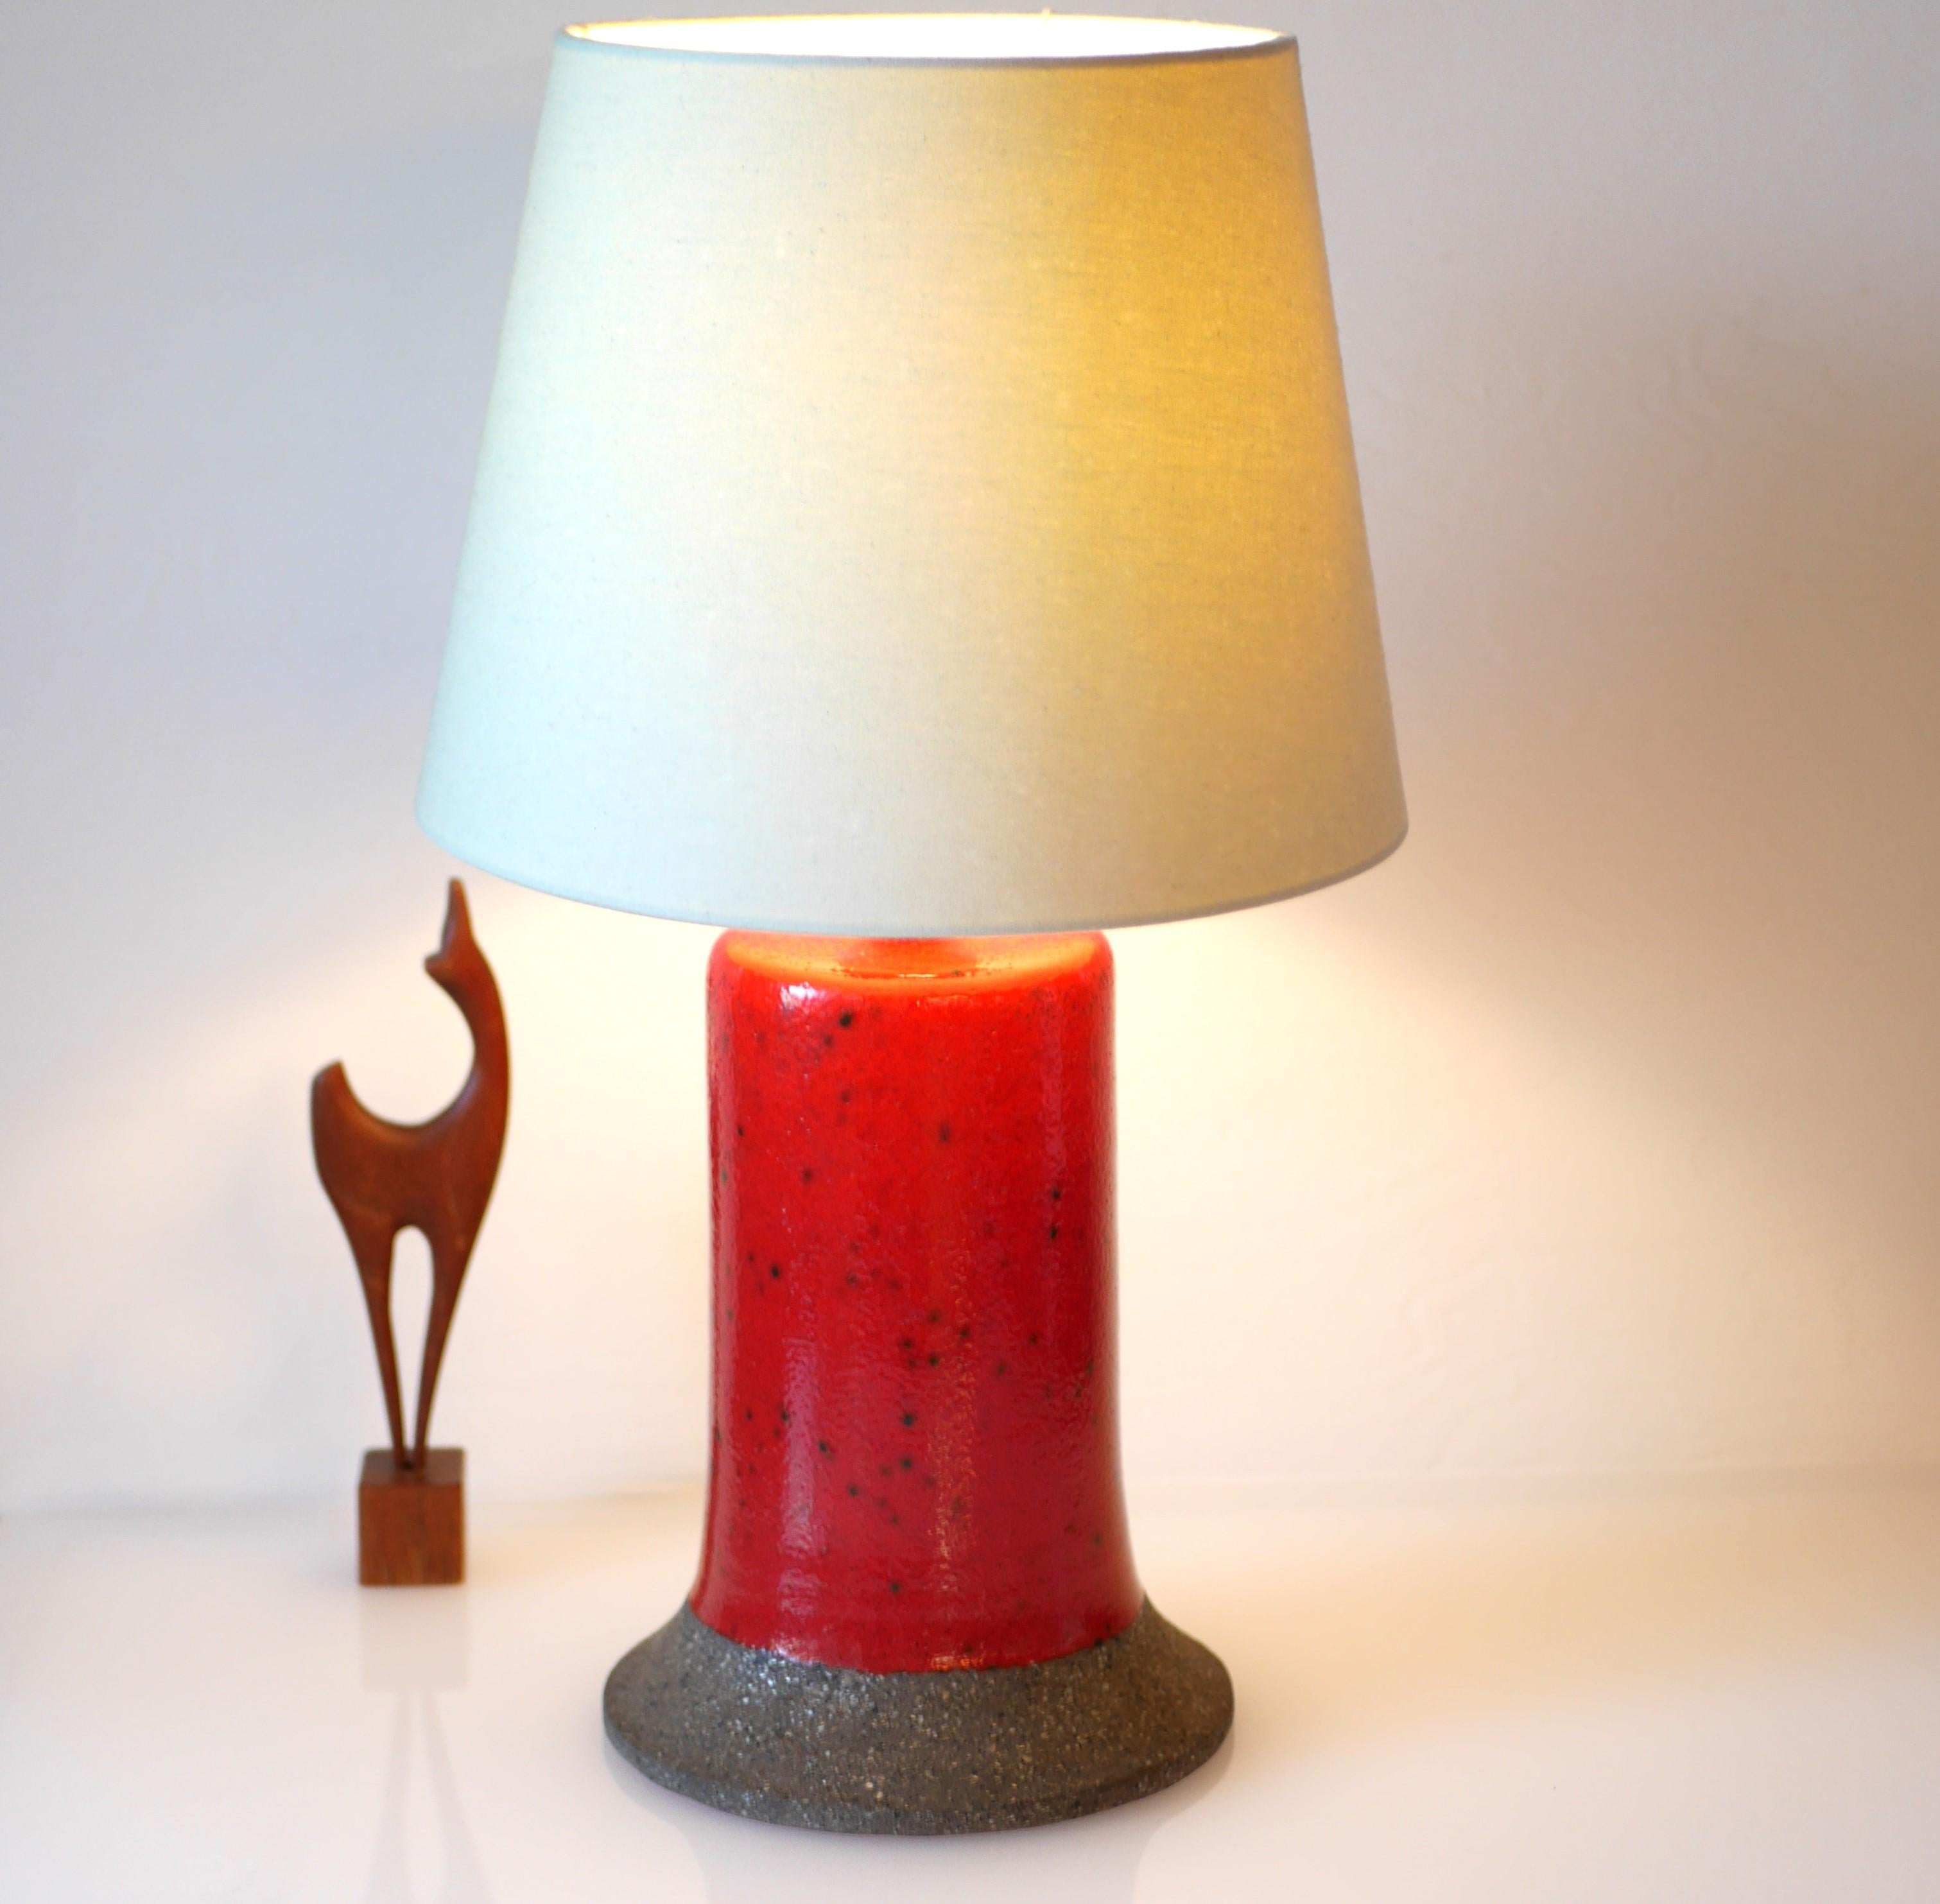 Bright red Scandinavian Mid-century modern table lamp. A very special and rather large vintage ceramic lamp base, made by Thomas Hellström for Nittsjö Keramik, Sweden. This lamp base has a simple design, yet it is the fantastic red color on the base